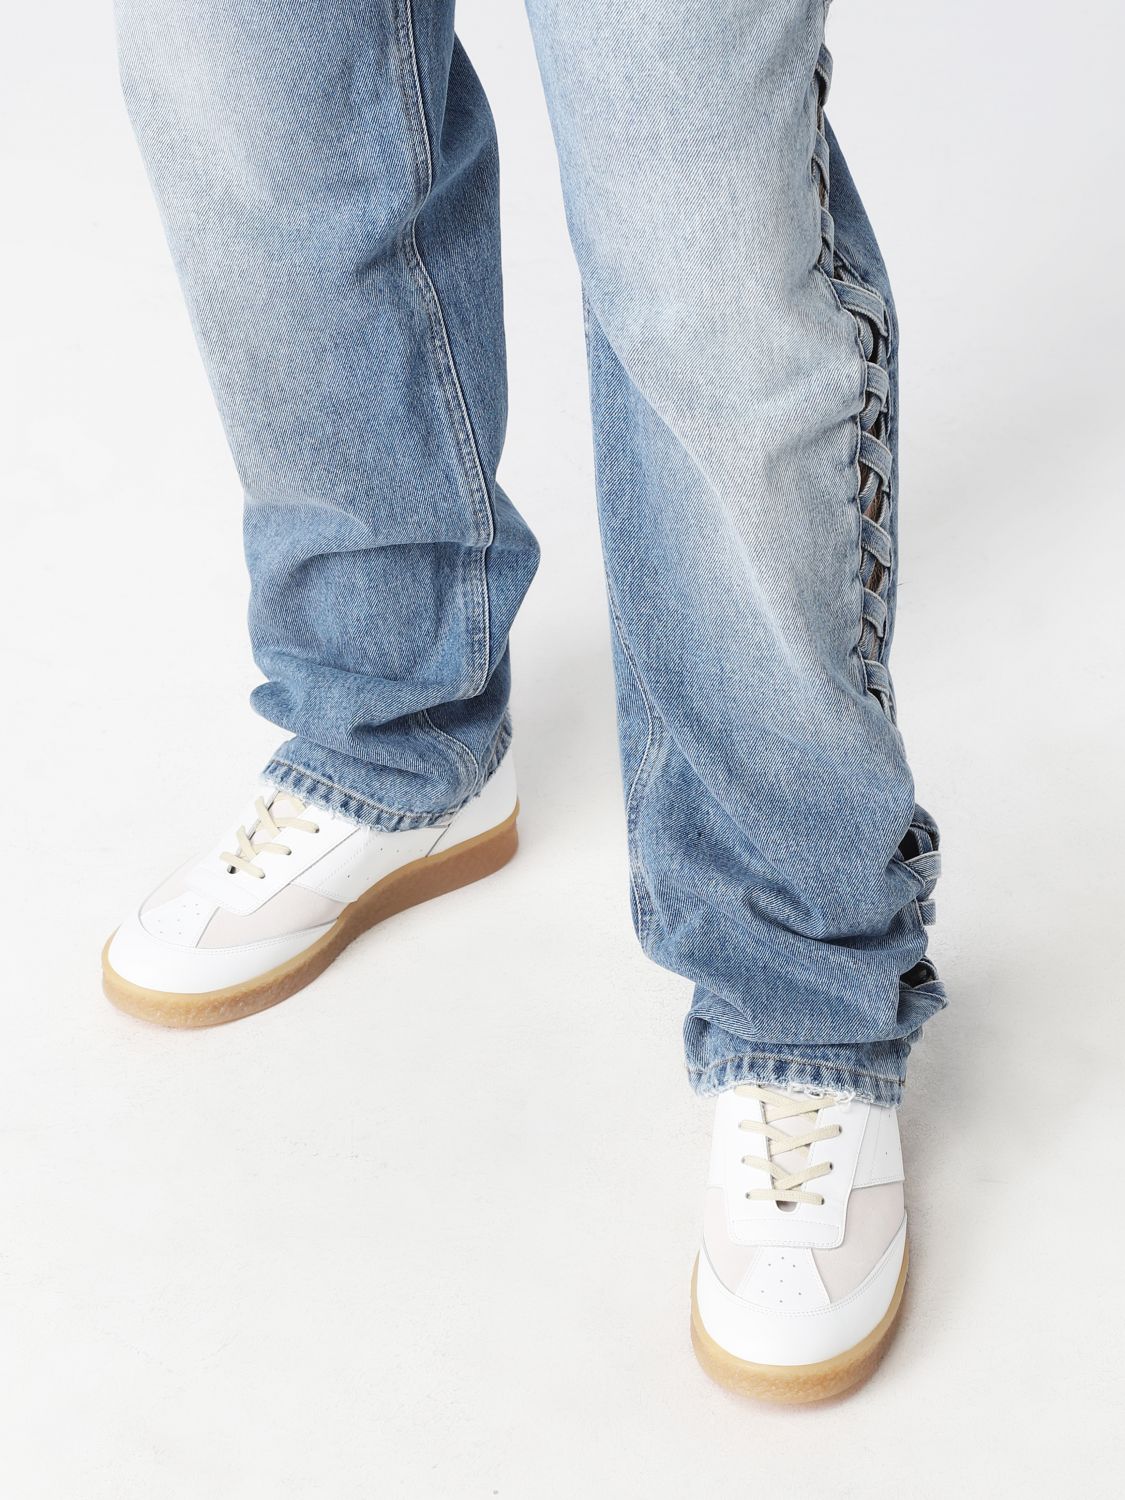 MM6 MAISON MARGIELA: sneakers in leather and suede - White | Mm6 Maison Margiela sneakers